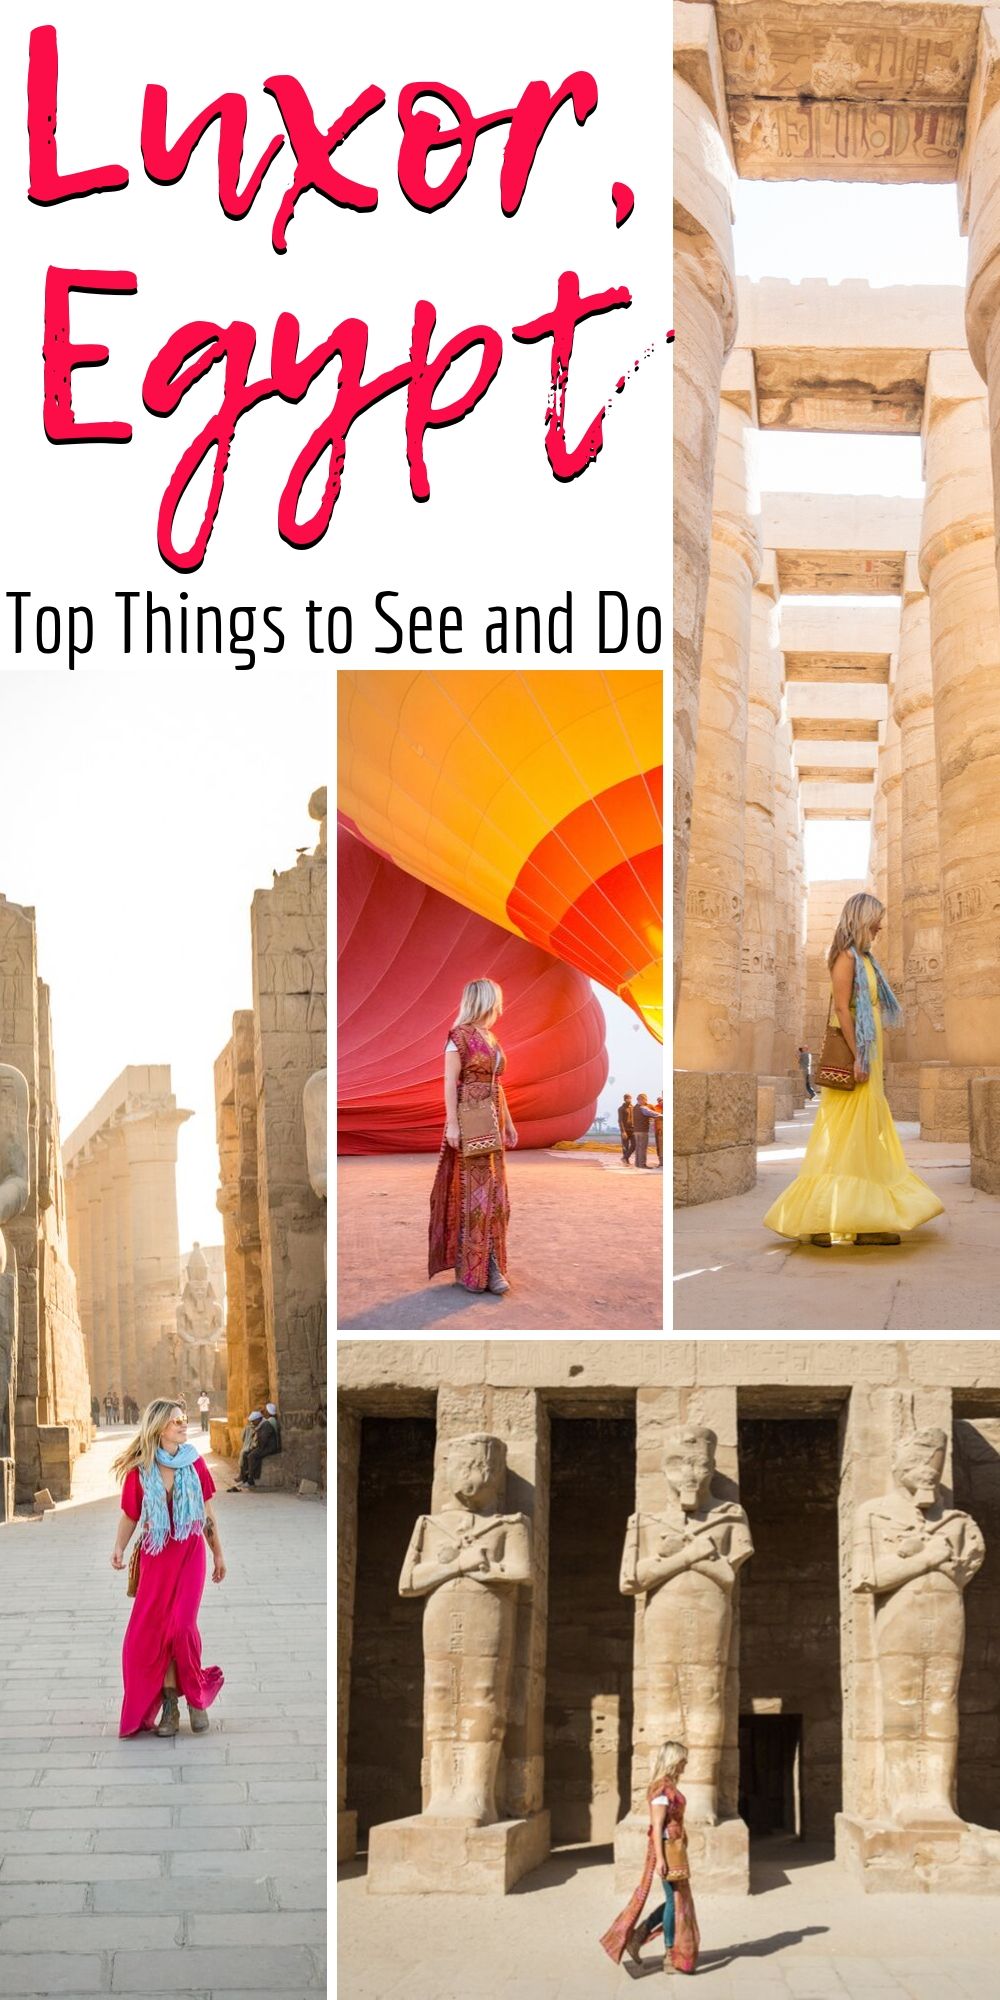 Top Things to See and Do in Luxor, Egypt on Pinterest